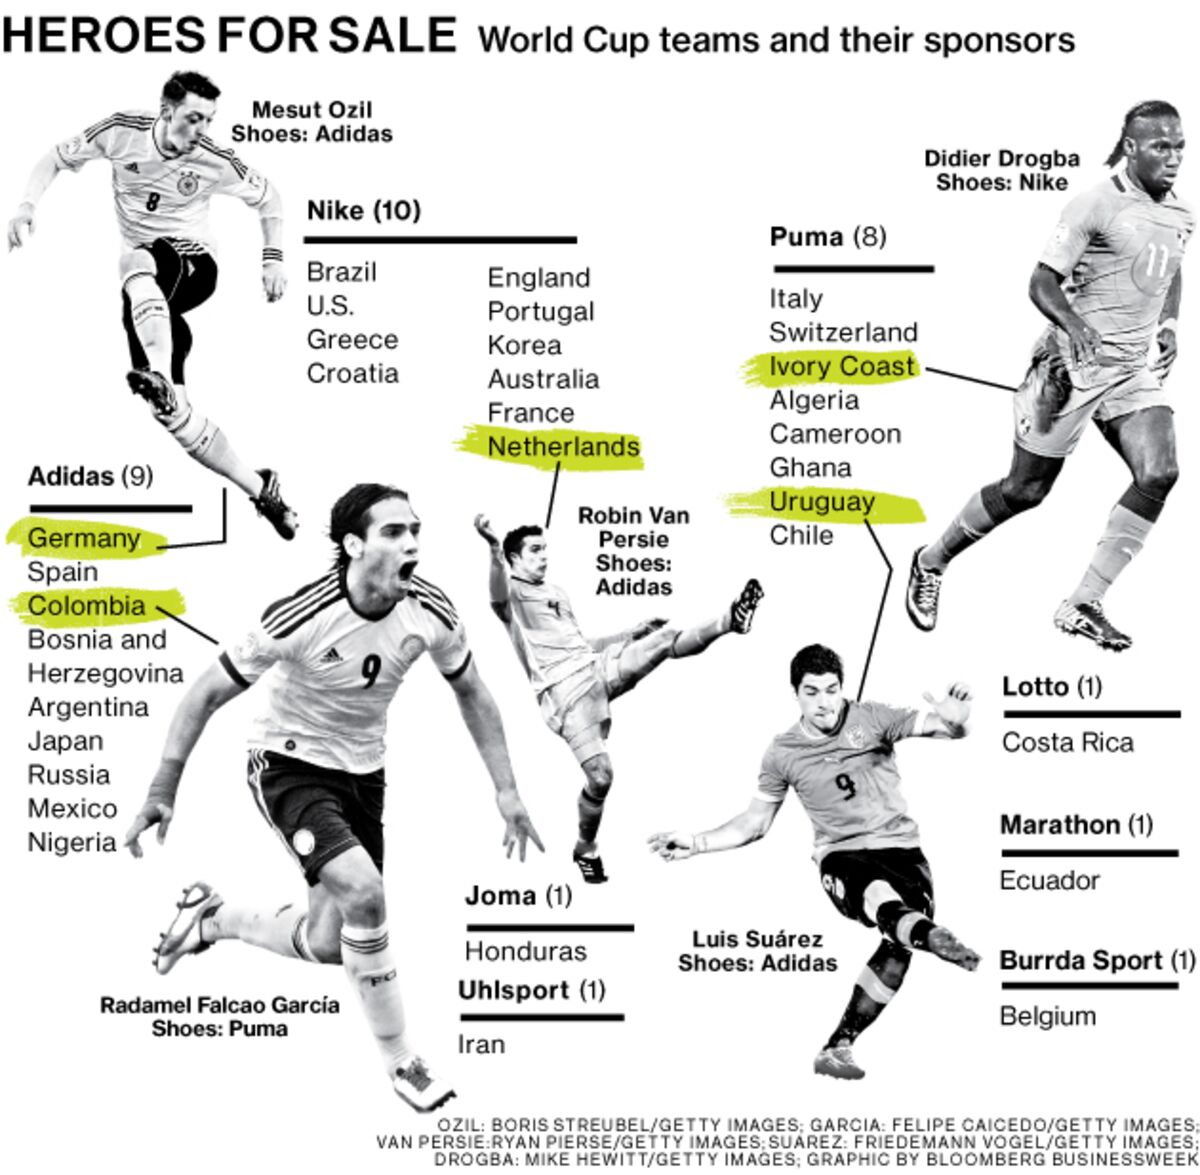 2014 World Cup: Nike, Adidas Gear Up for Soccer Next Round - Bloomberg